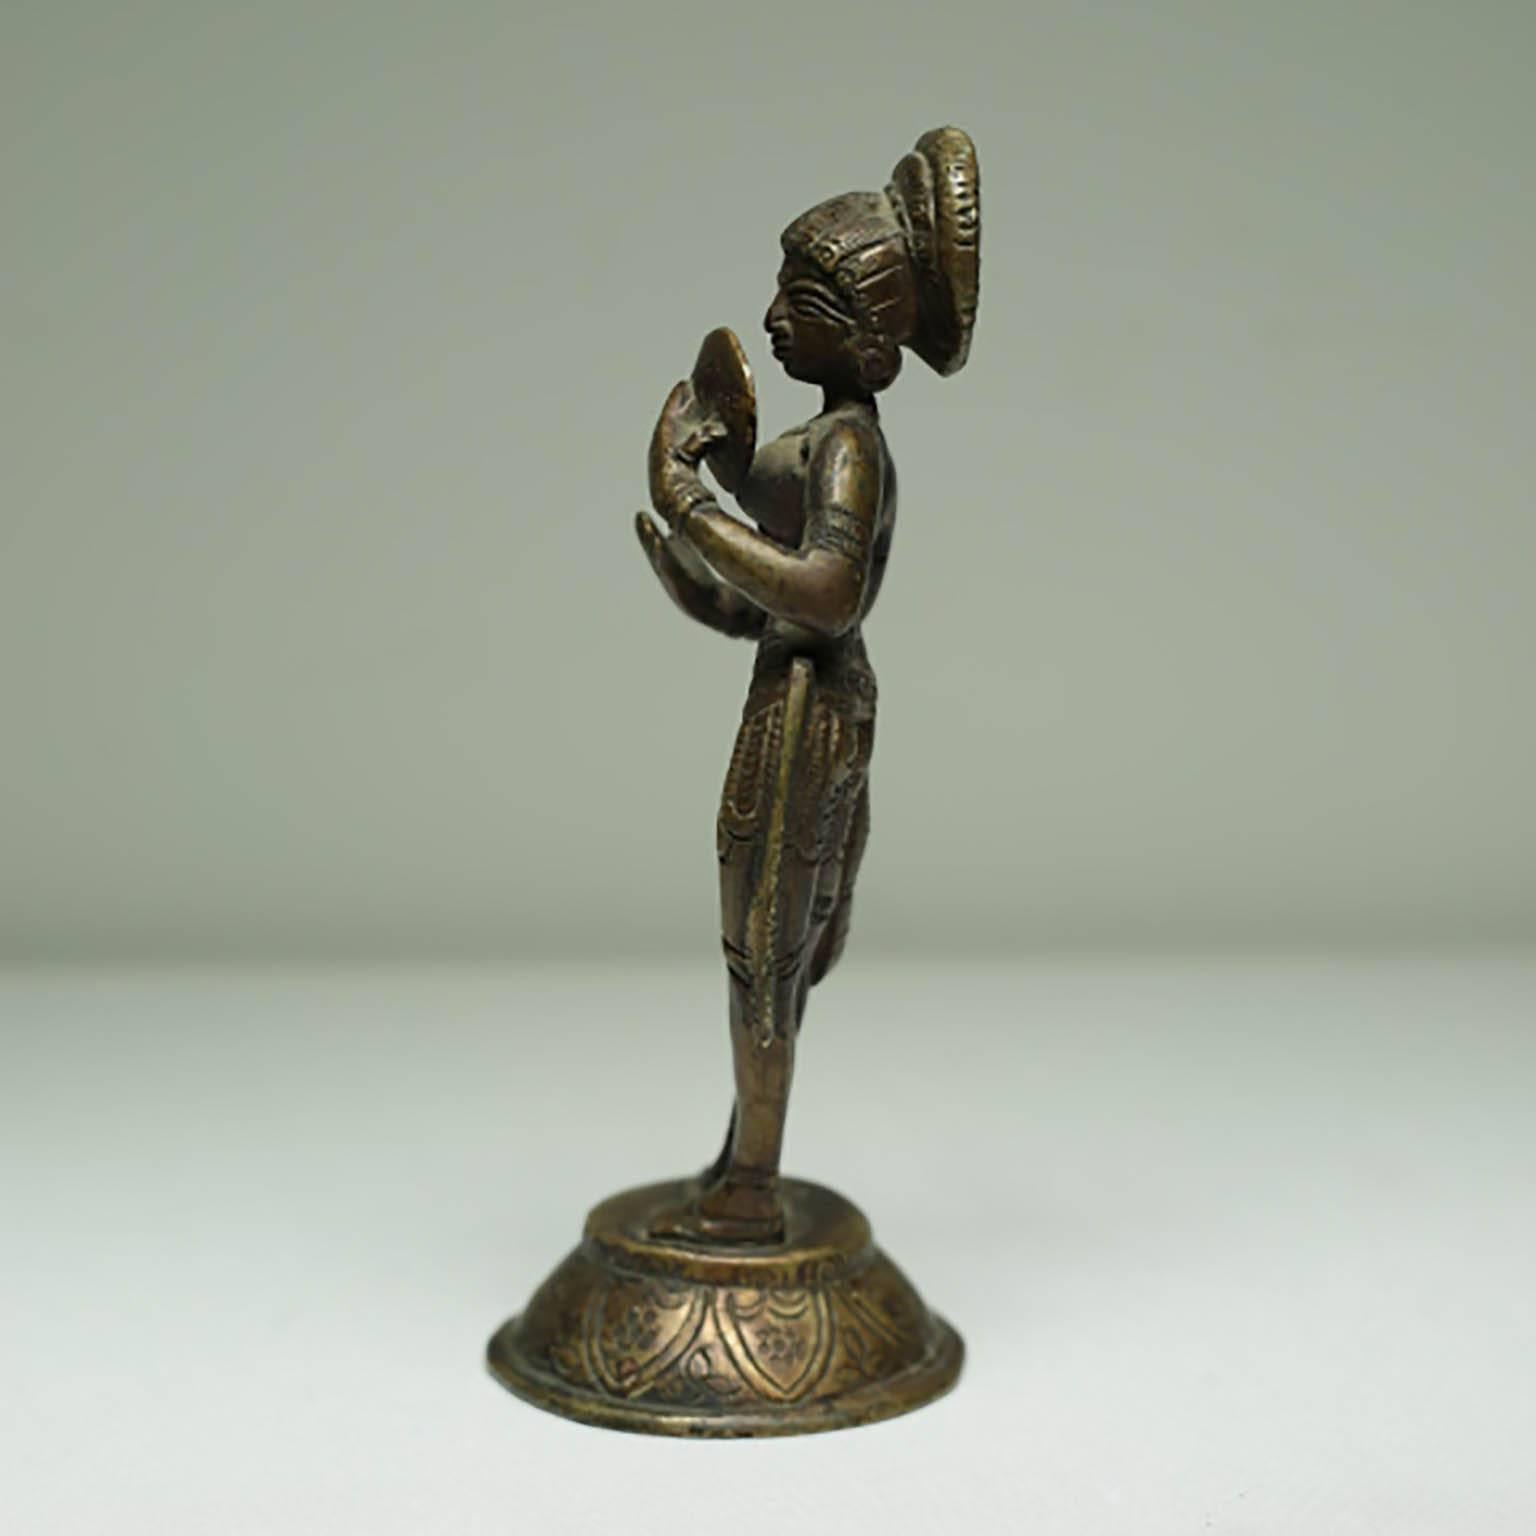 Small bronze Indian diety, circa 1960s-1970s.